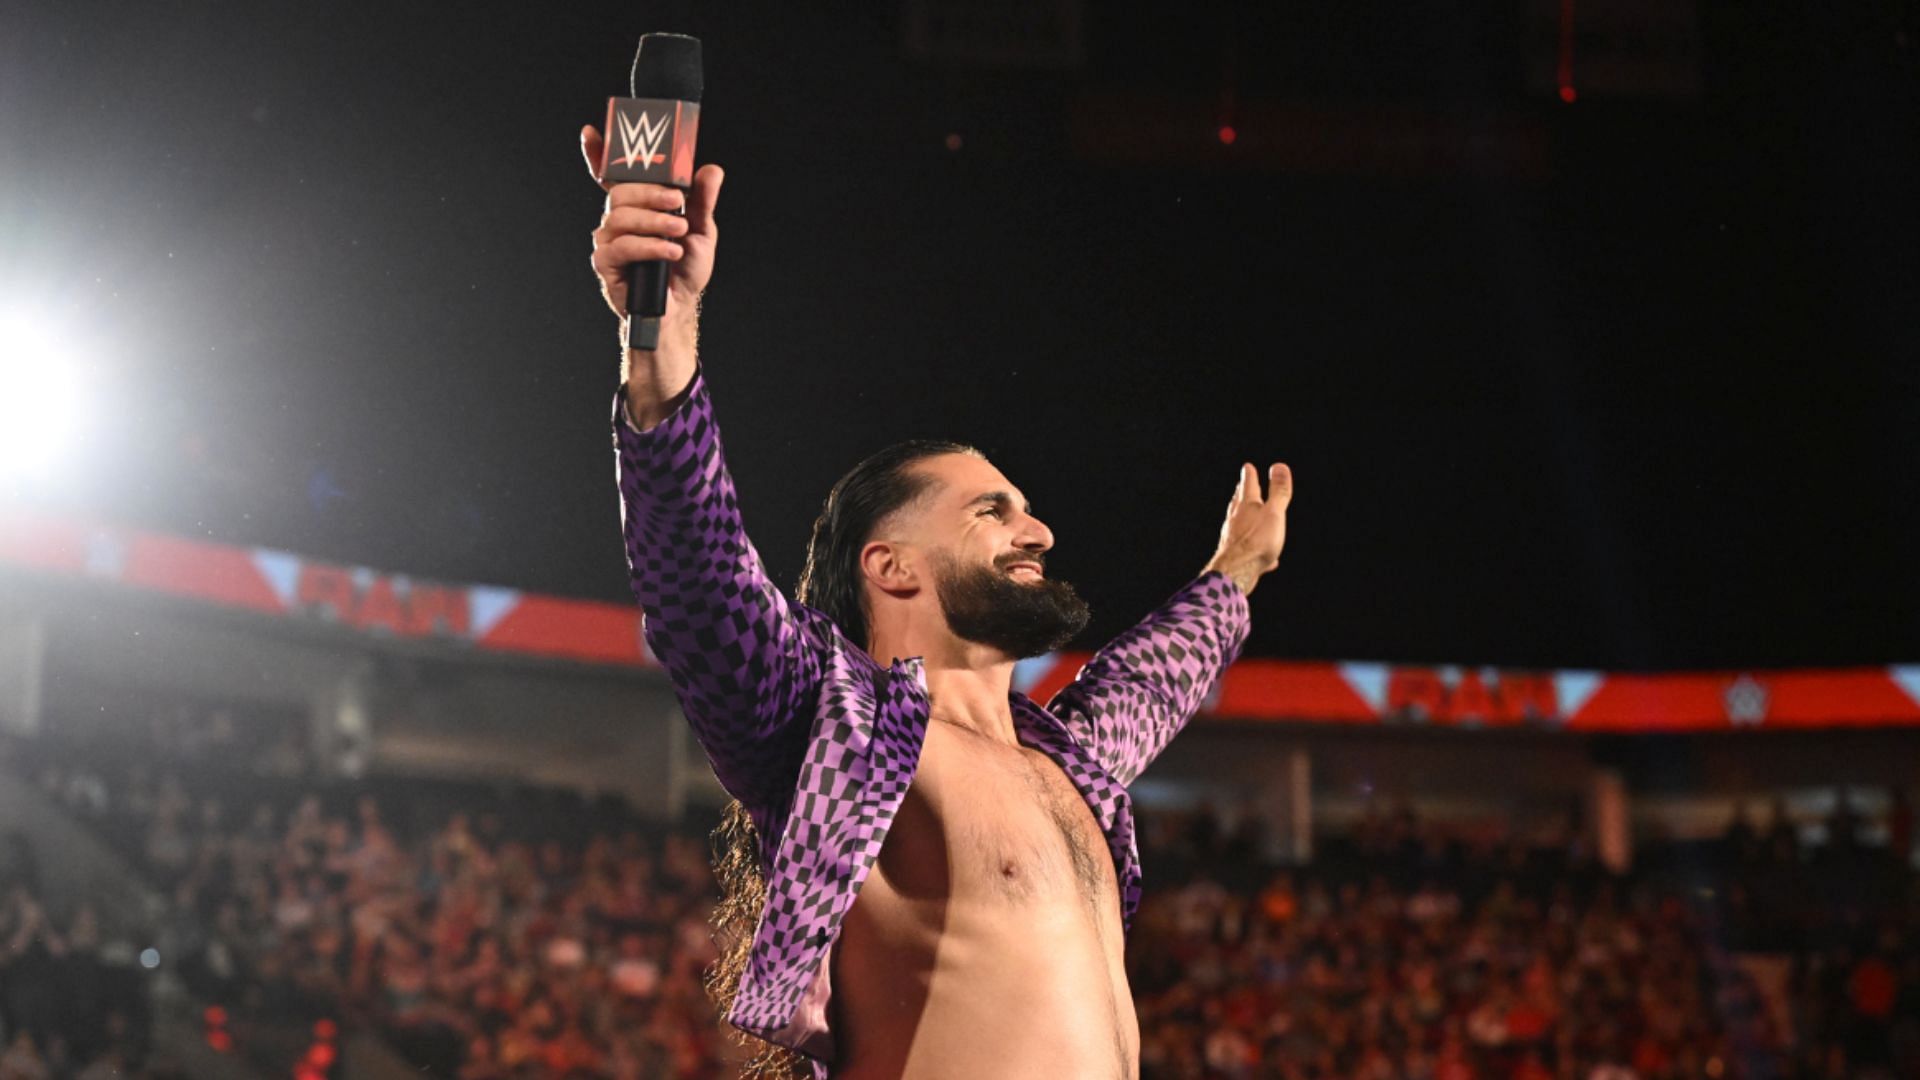 WWE Superstar Seth Rollins delivering a promo during RAW